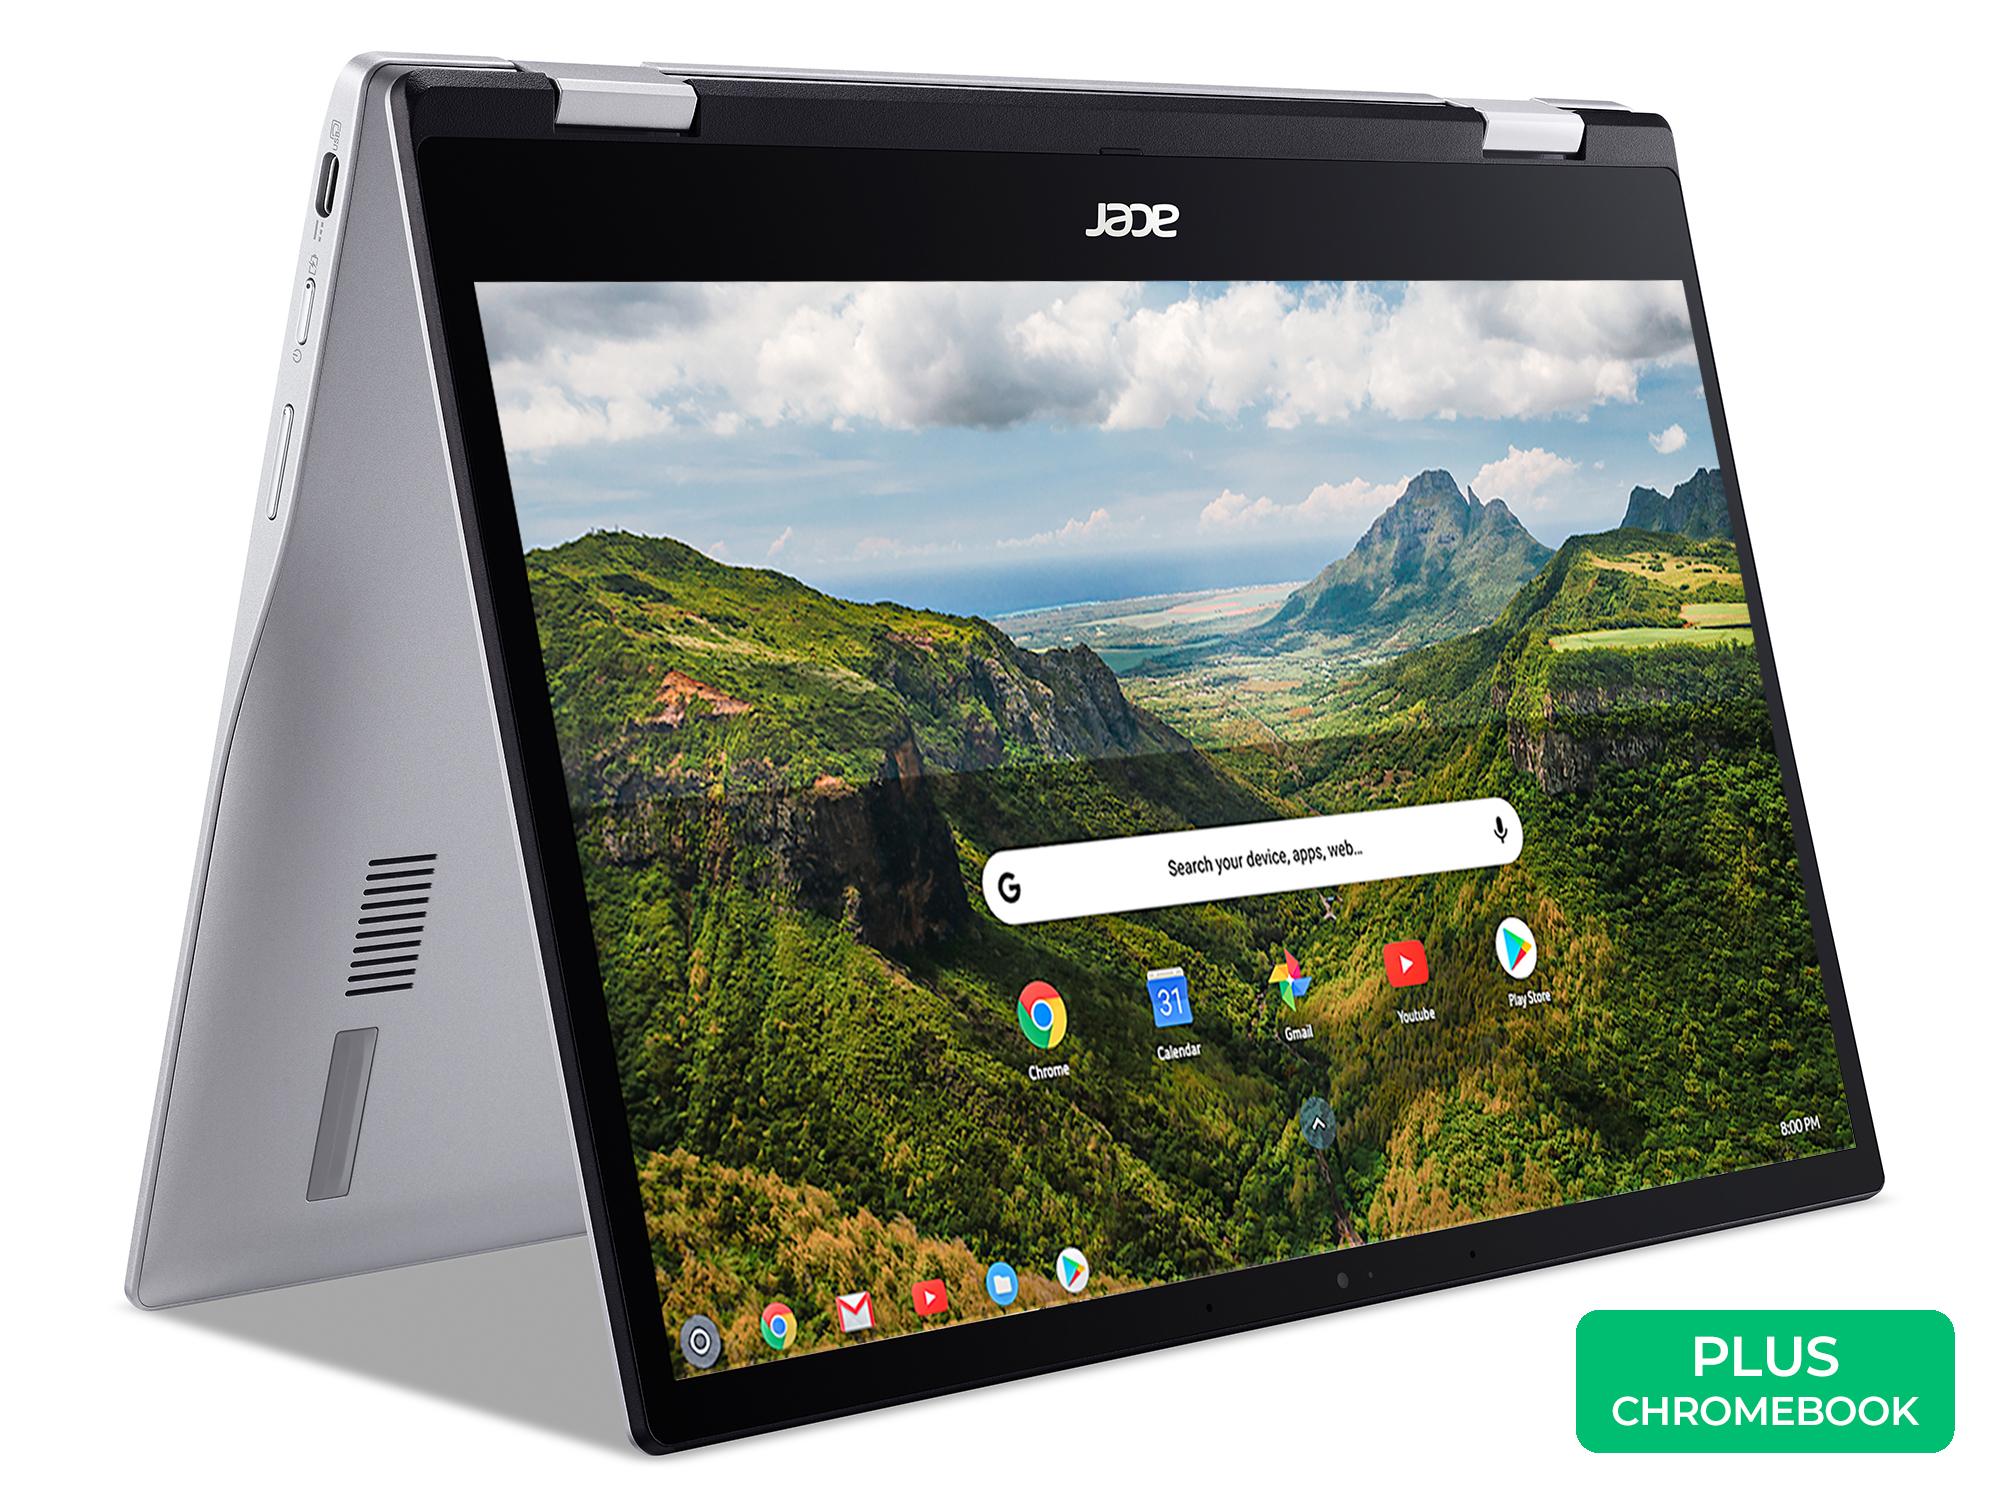 £299, ACER Spin 513 13.3inch 2 in 1 Chromebook - Qualcomm SC7180, 64 GB eMMC, Silver, Plus Chromebook, Chrome OS, Snapdragon 7c Compute Platform, RAM: 4 GB / Storage: 64 GB eMMC, Full HD touchscreen, Battery life: Up to 14 hours, 